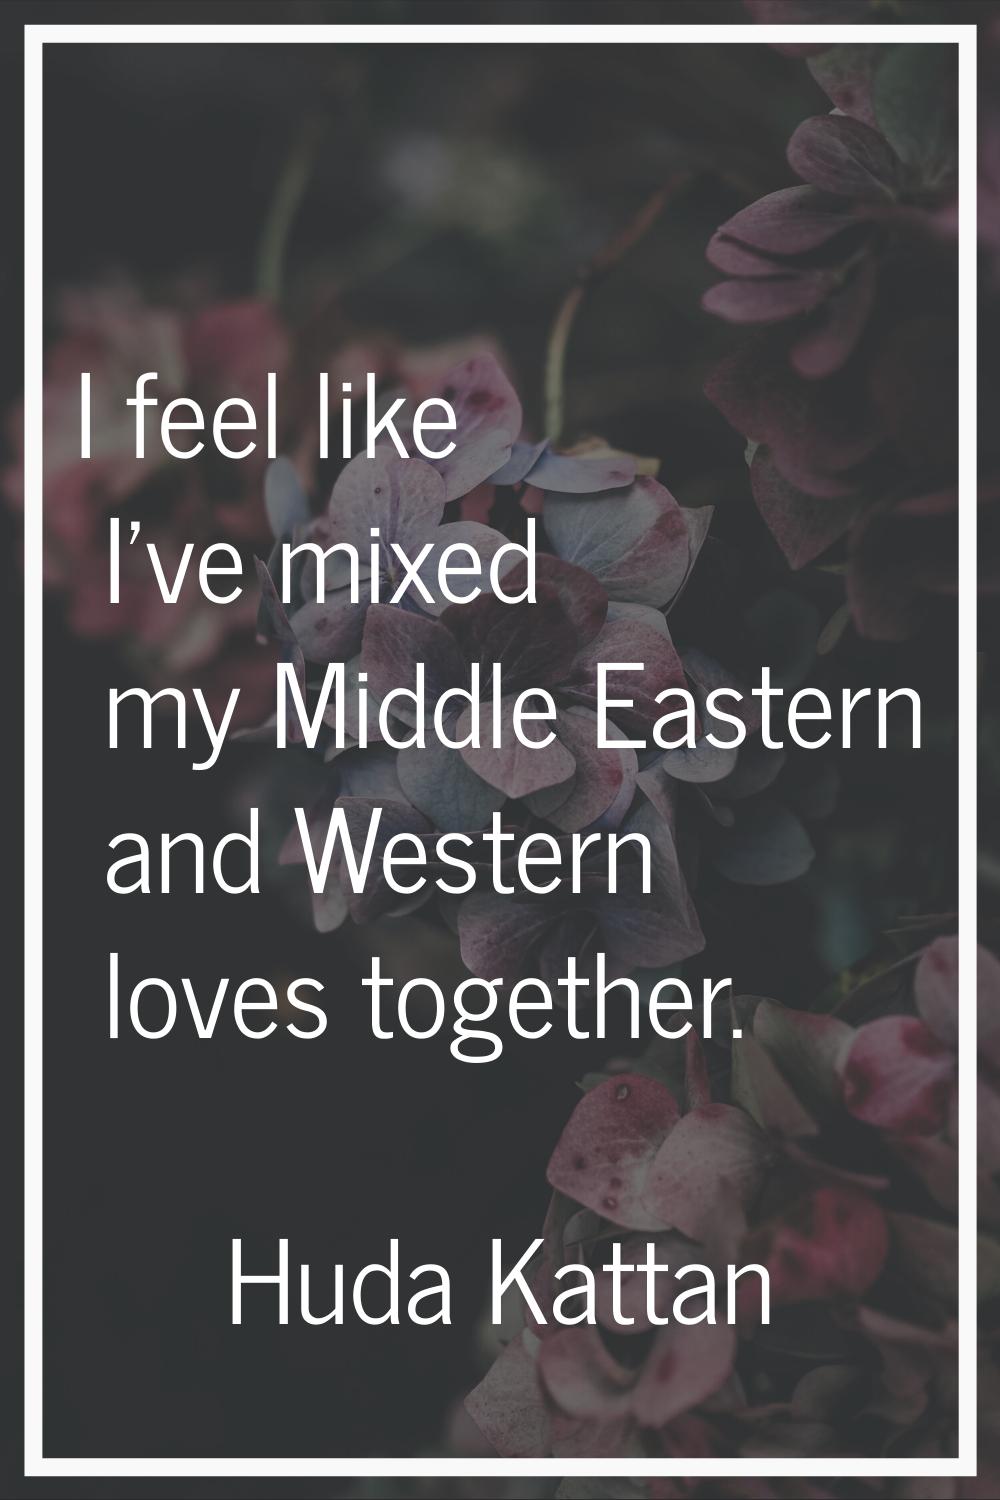 I feel like I've mixed my Middle Eastern and Western loves together.